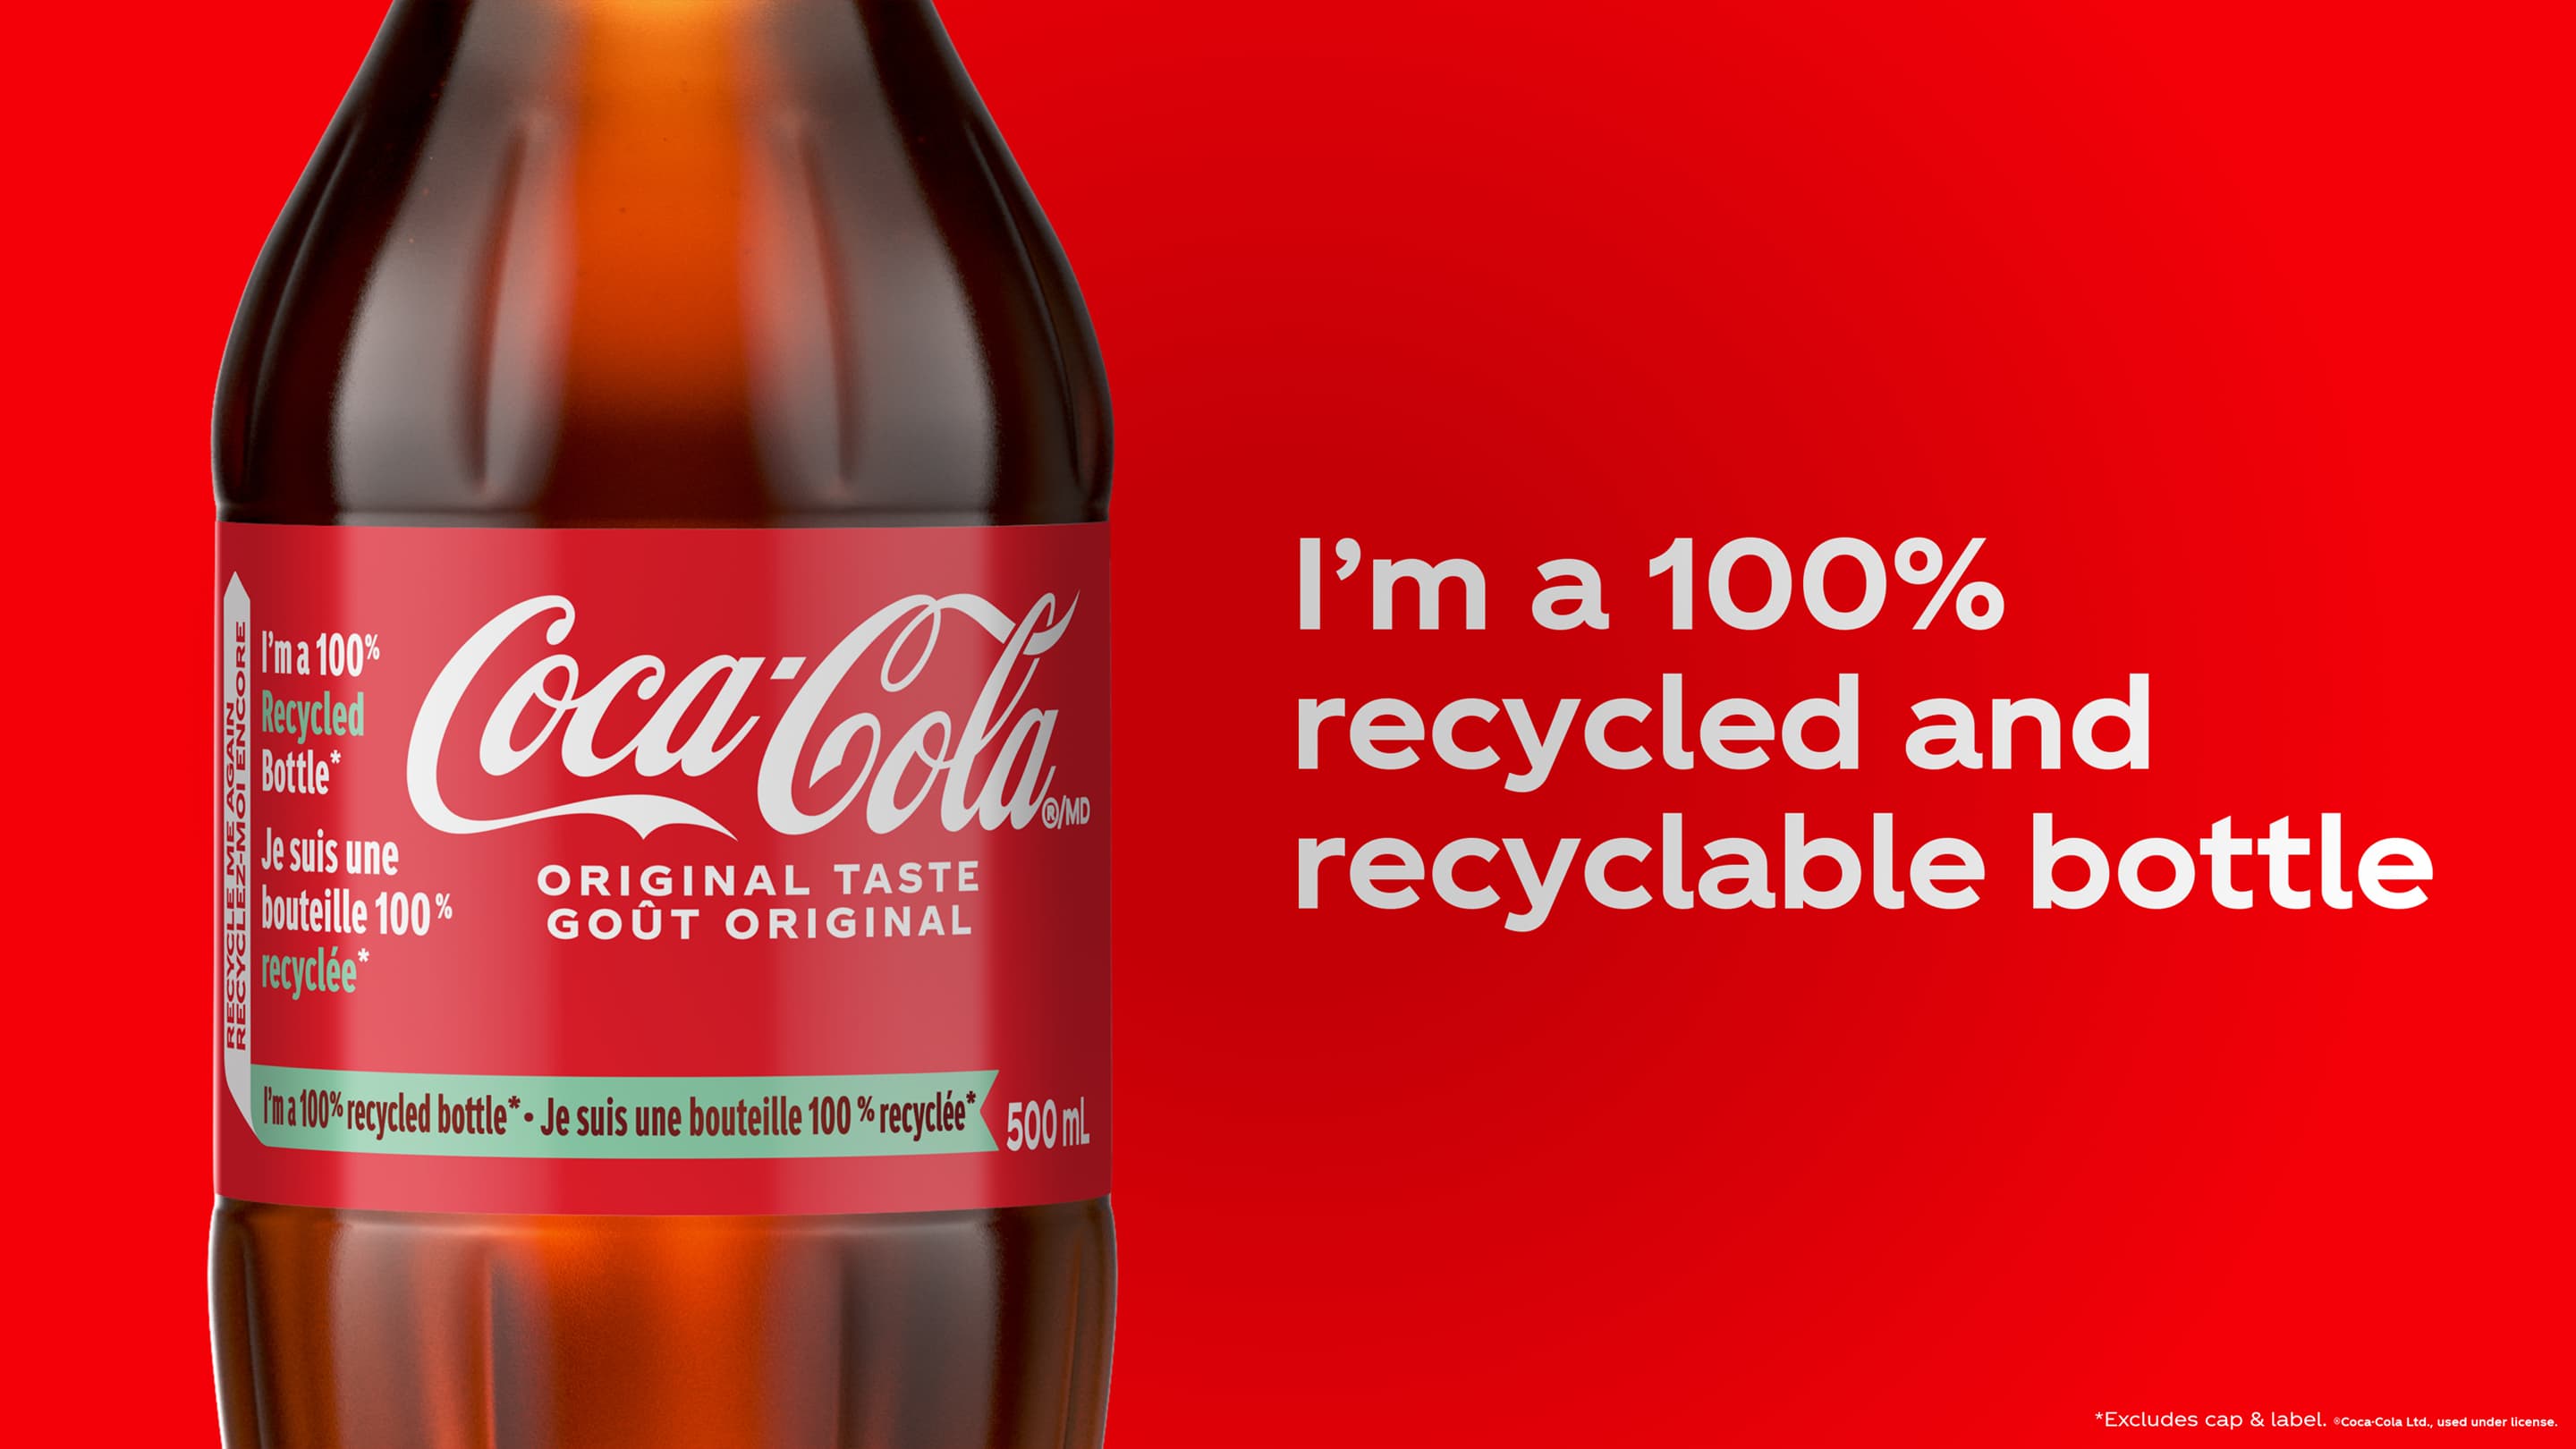 I'm a 100% recycled and recylcable bottle